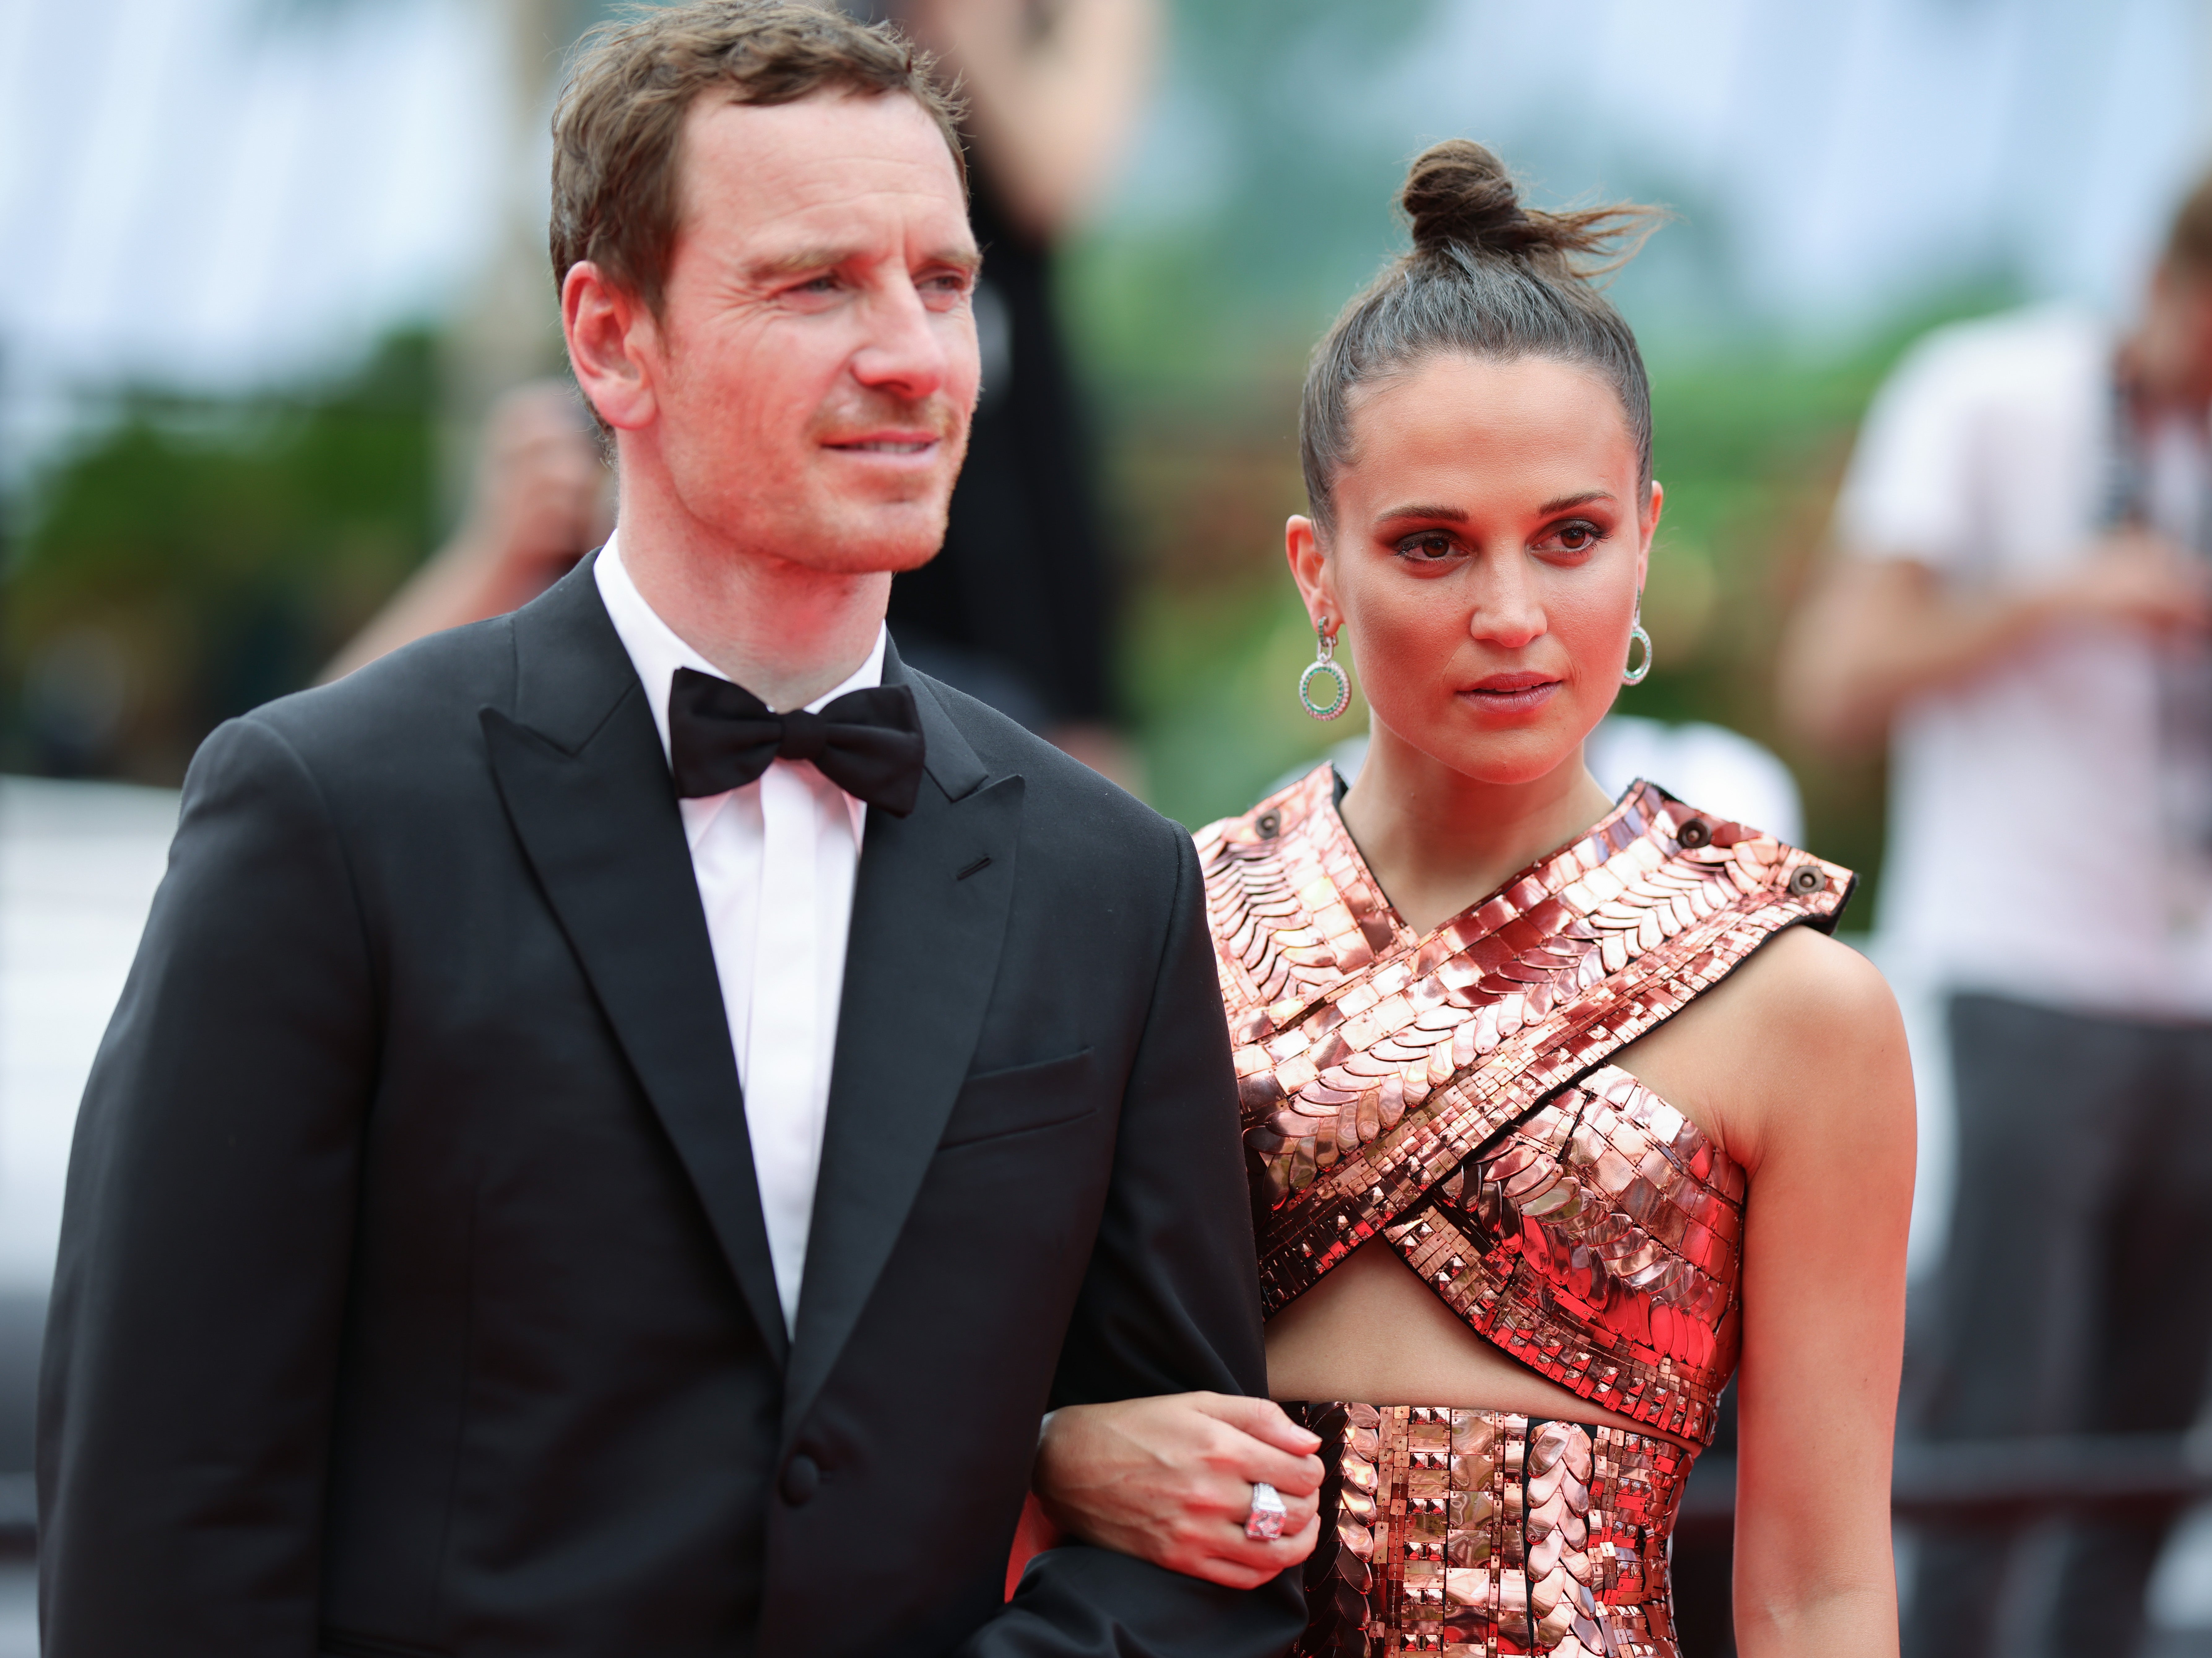 Alicia Vikander and Michael Fassbender welcomed a baby son last year